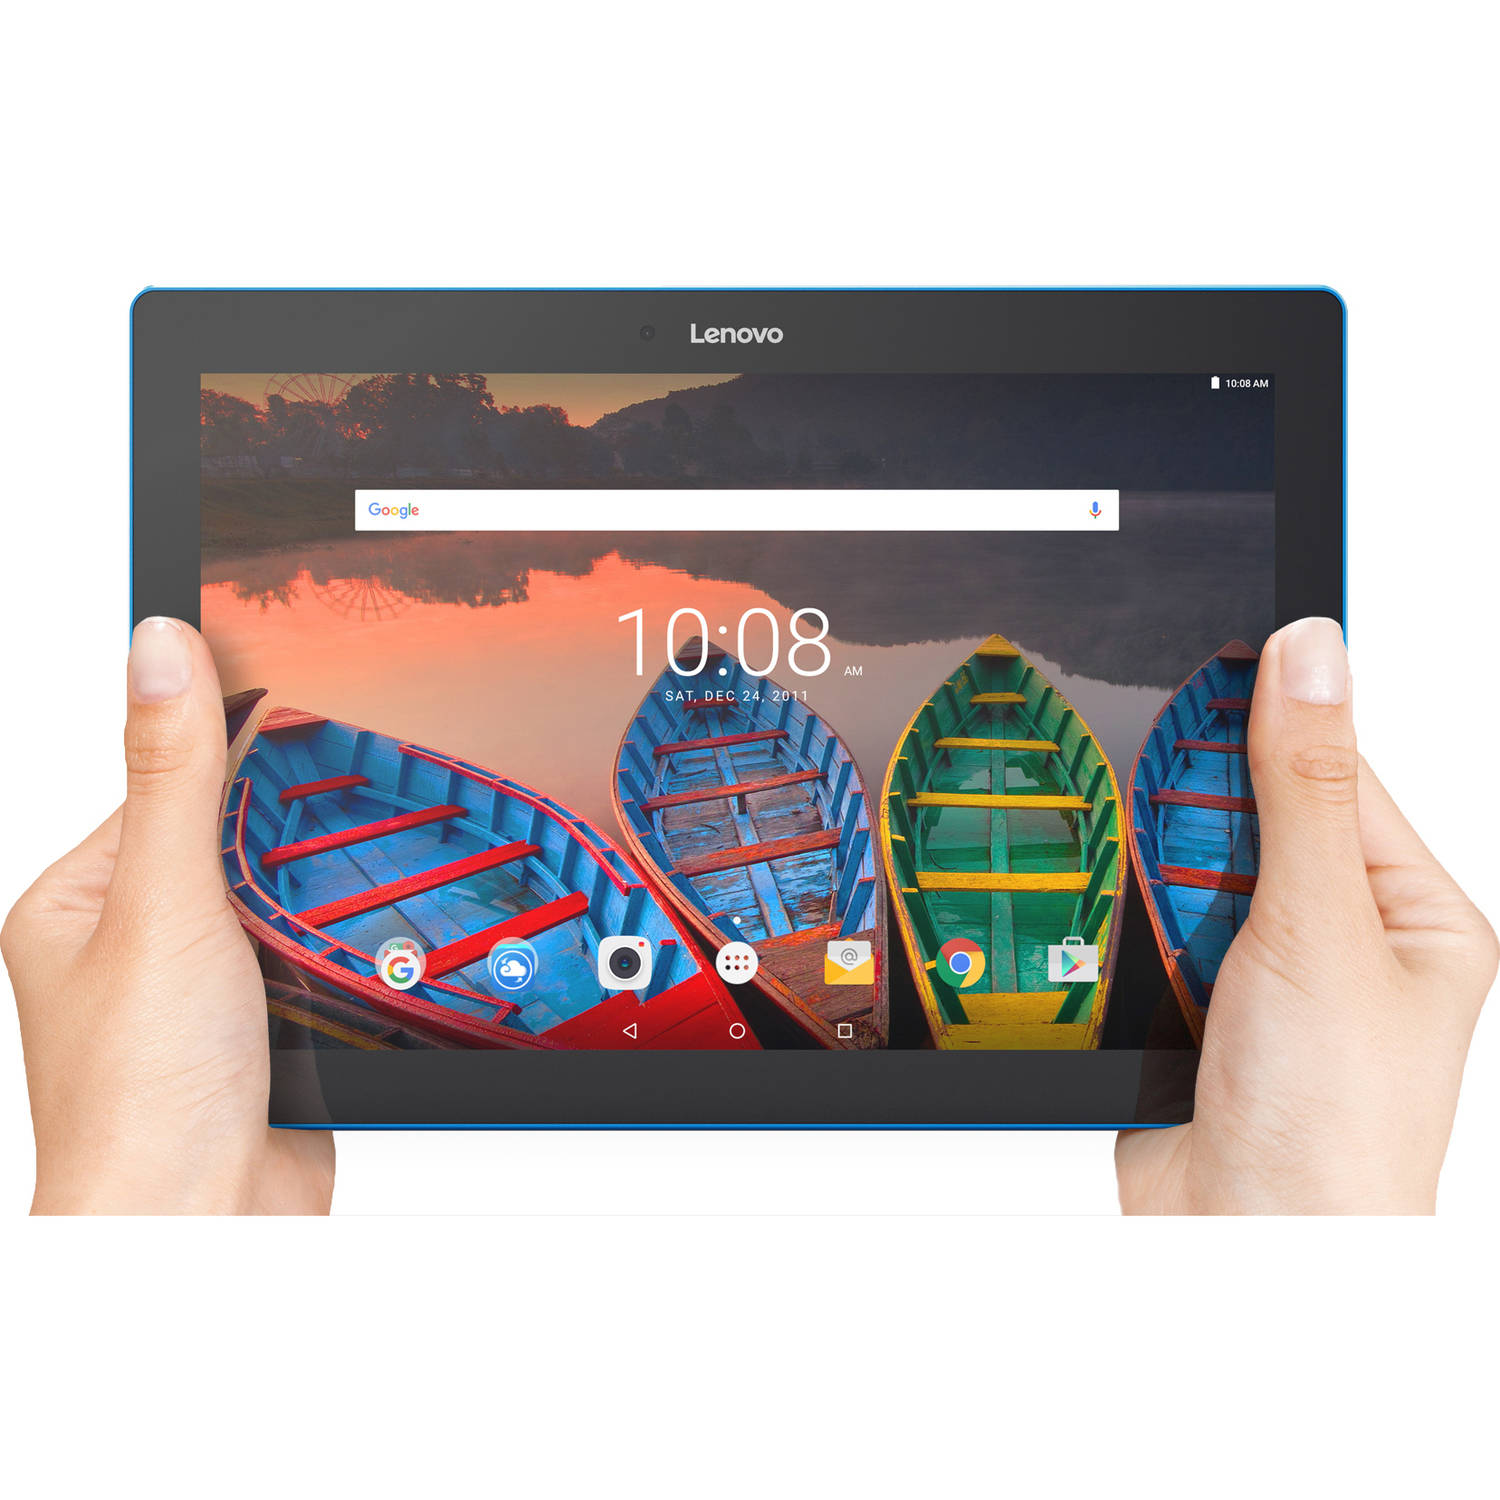 Lenovo Tab 10 10.1″ 16GB Android tablet for $80